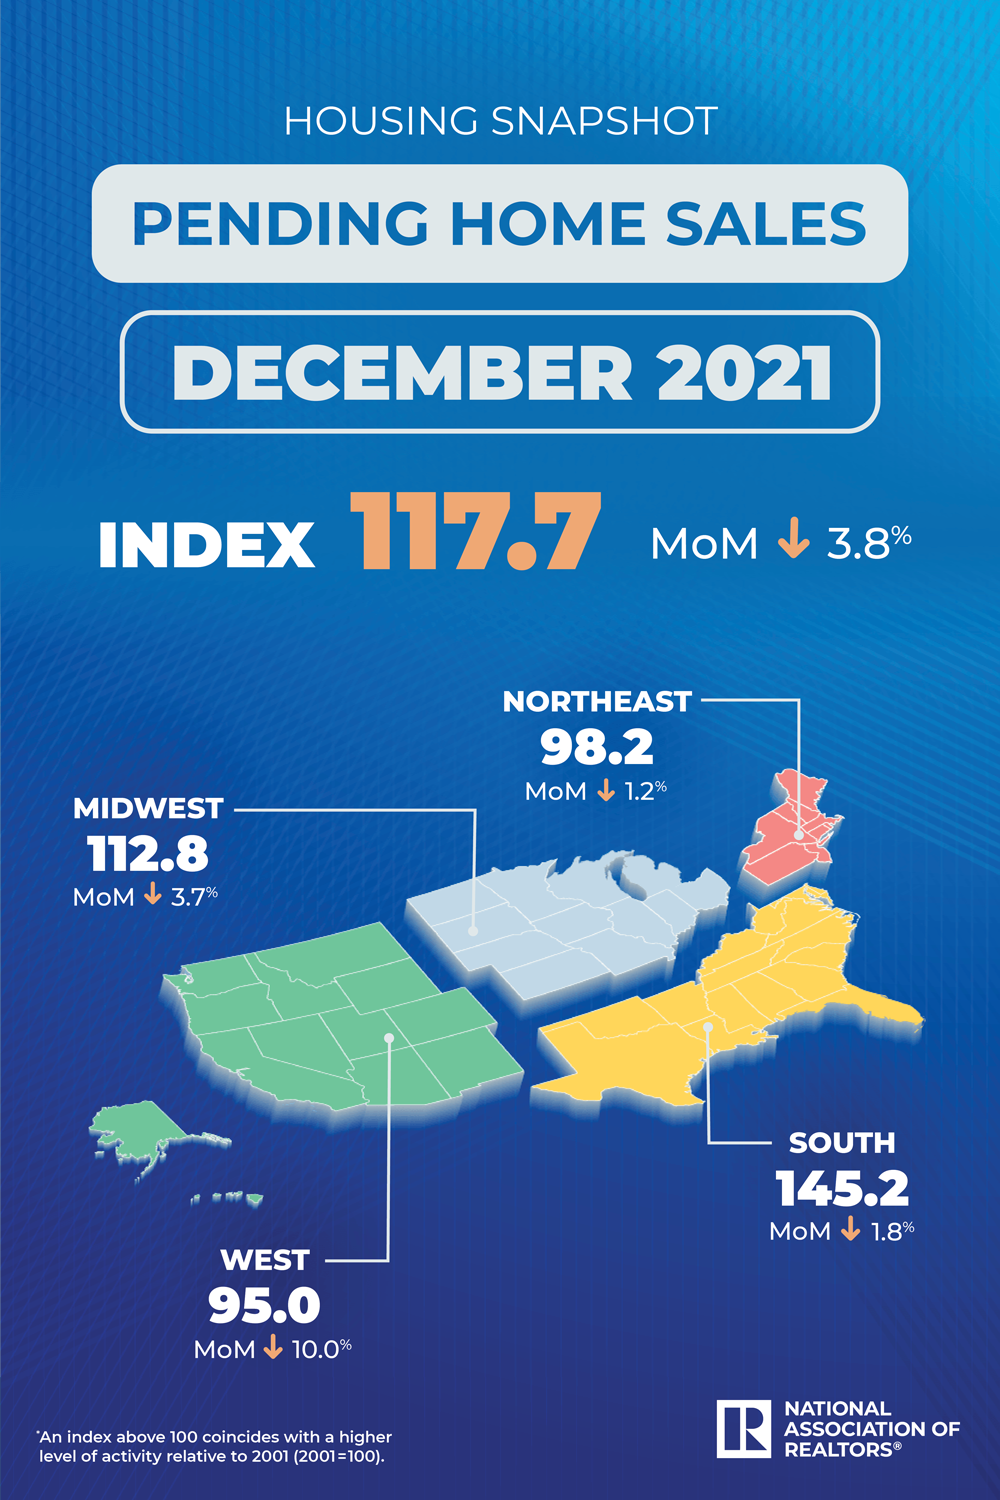 A graphic chart of the U.S. showing pending home sales information from December 2021